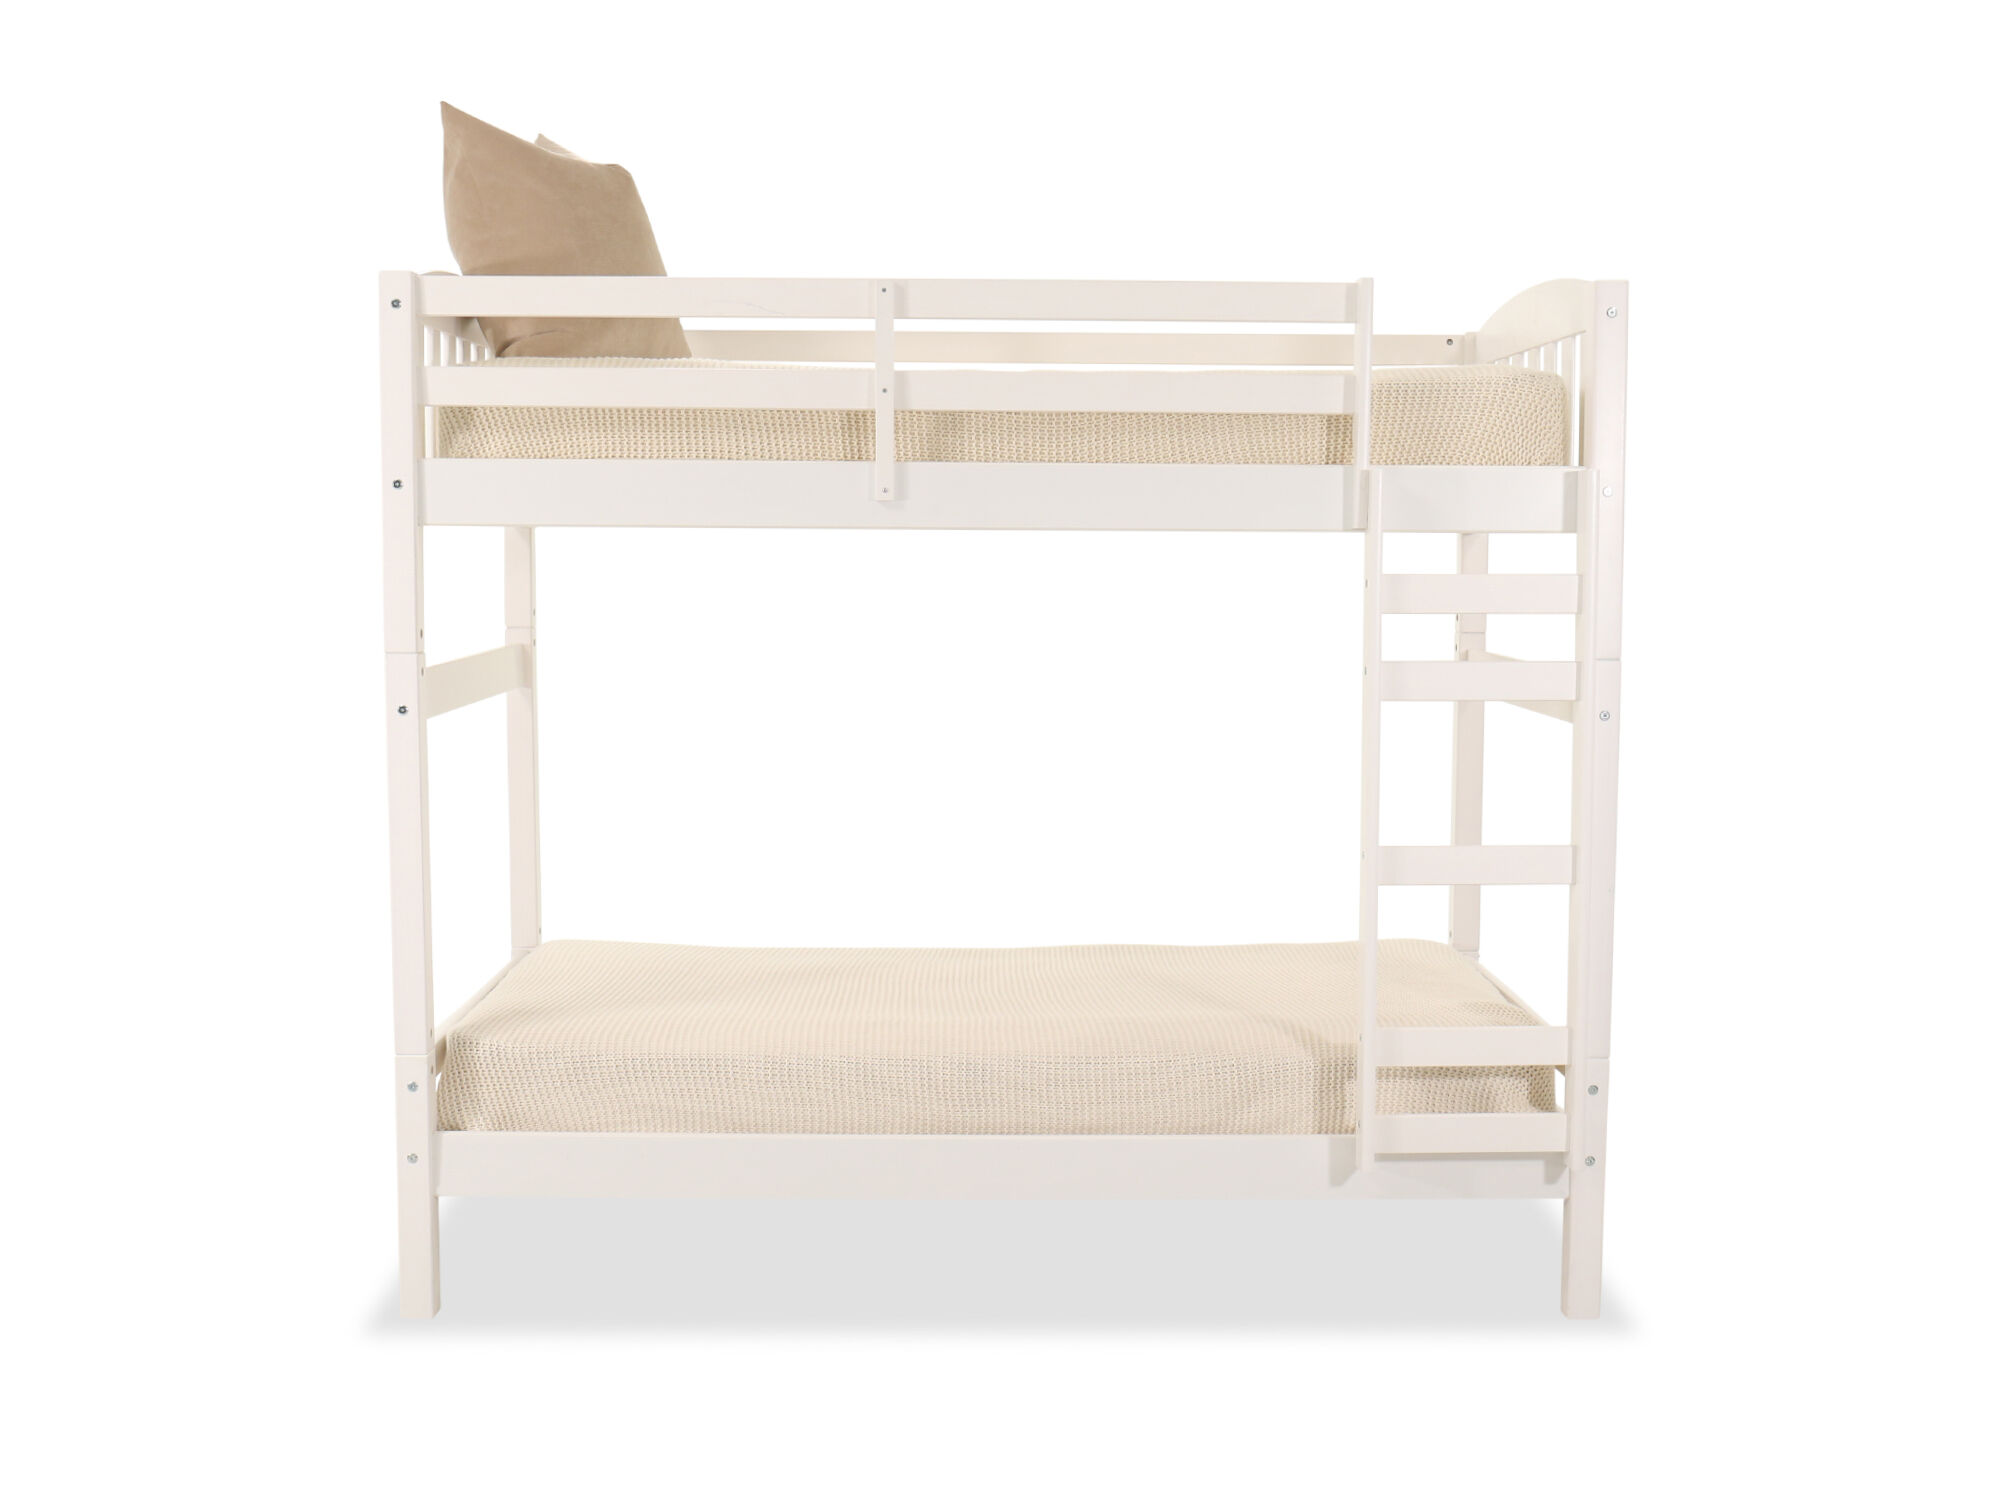 off white bunk beds